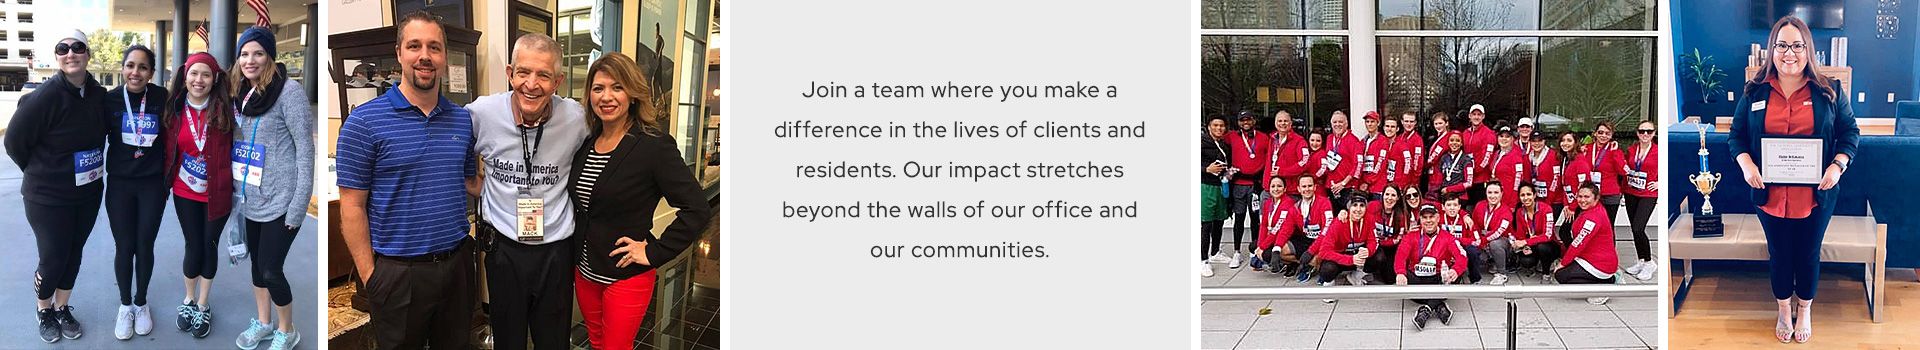 Join a team where you make a difference in the lives of clients and residents. Our impact stretches beyond the walls of our office and our communities.